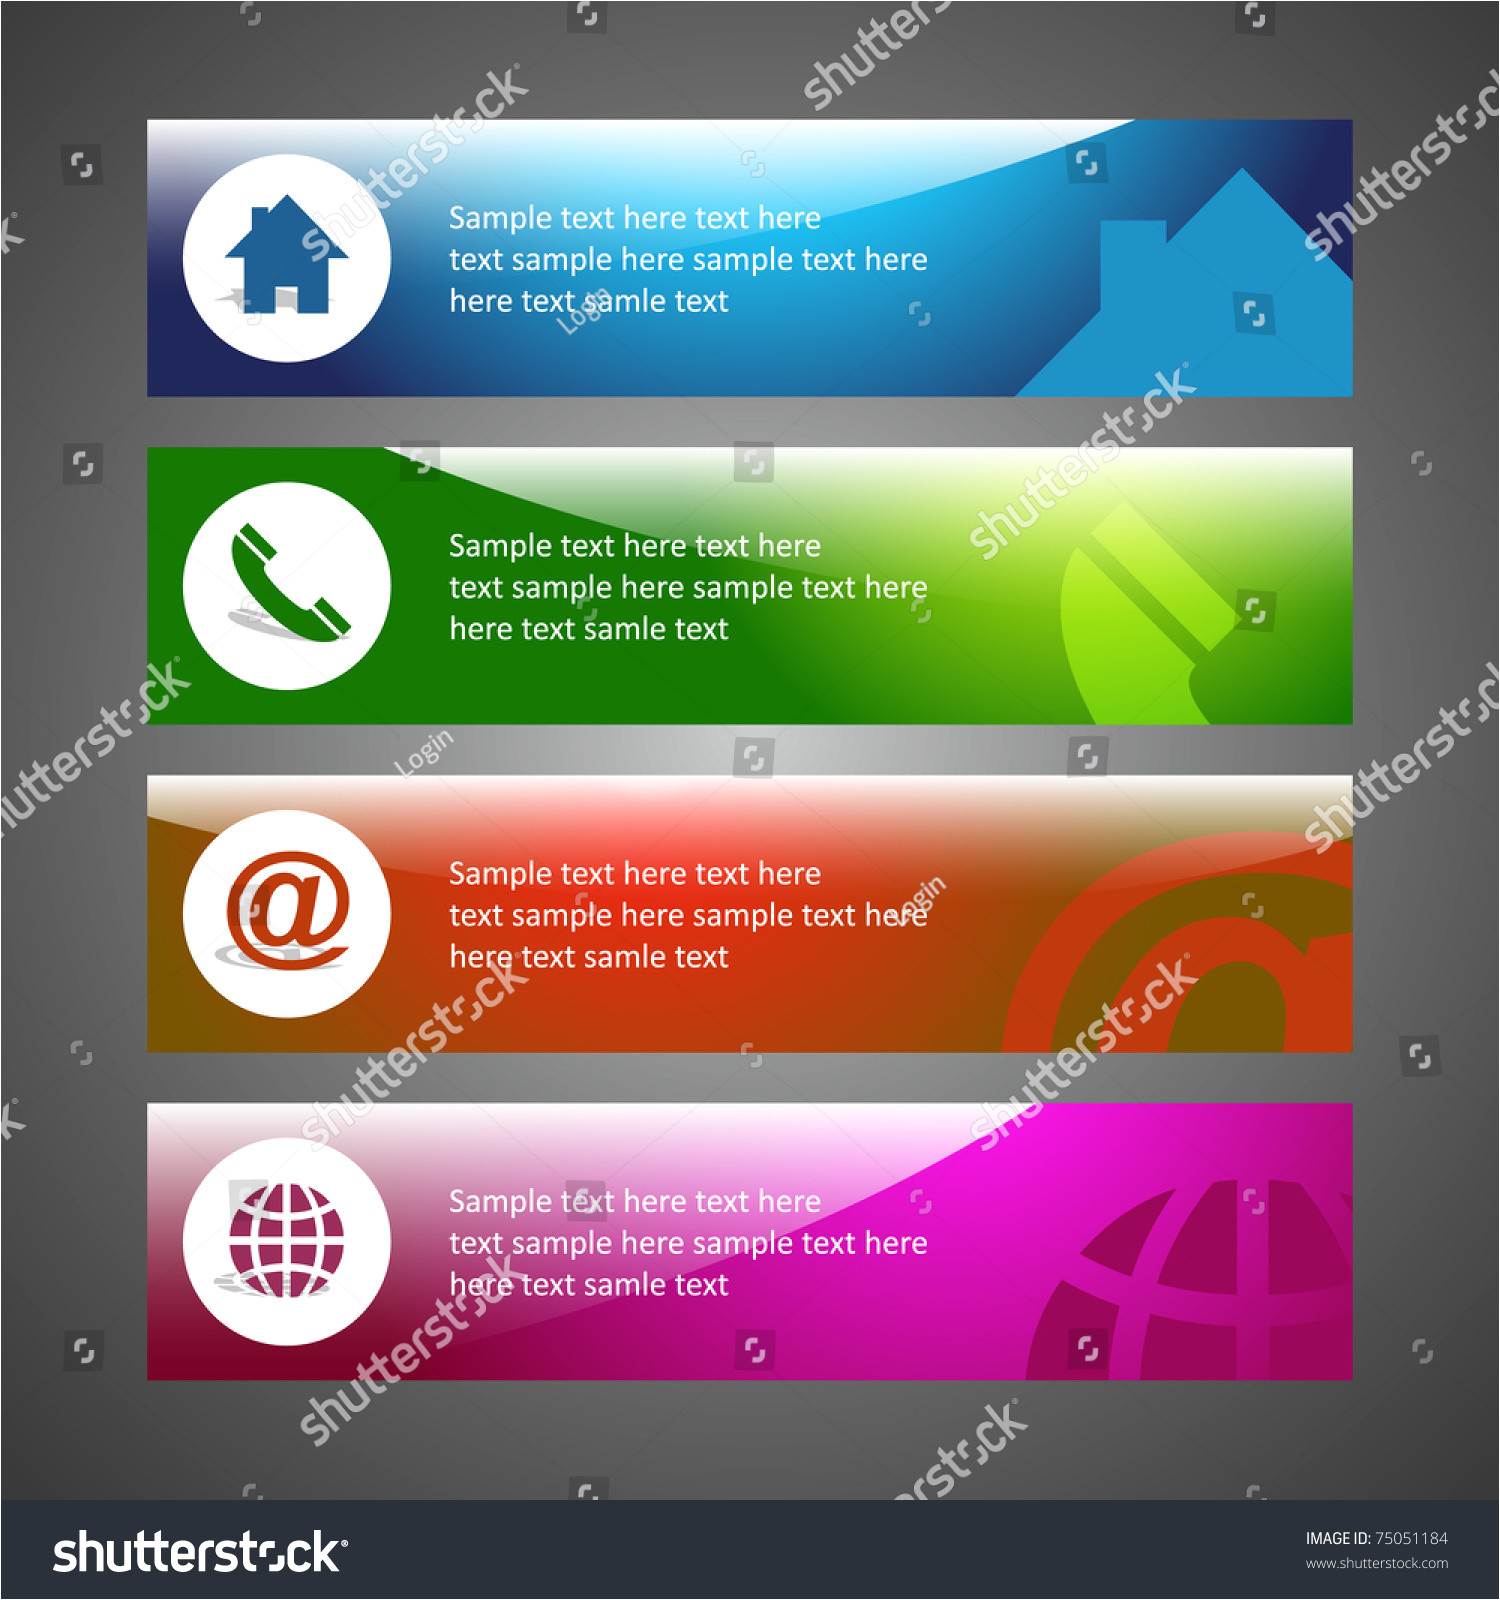 stock vector creative header design background template email home phone internet support service